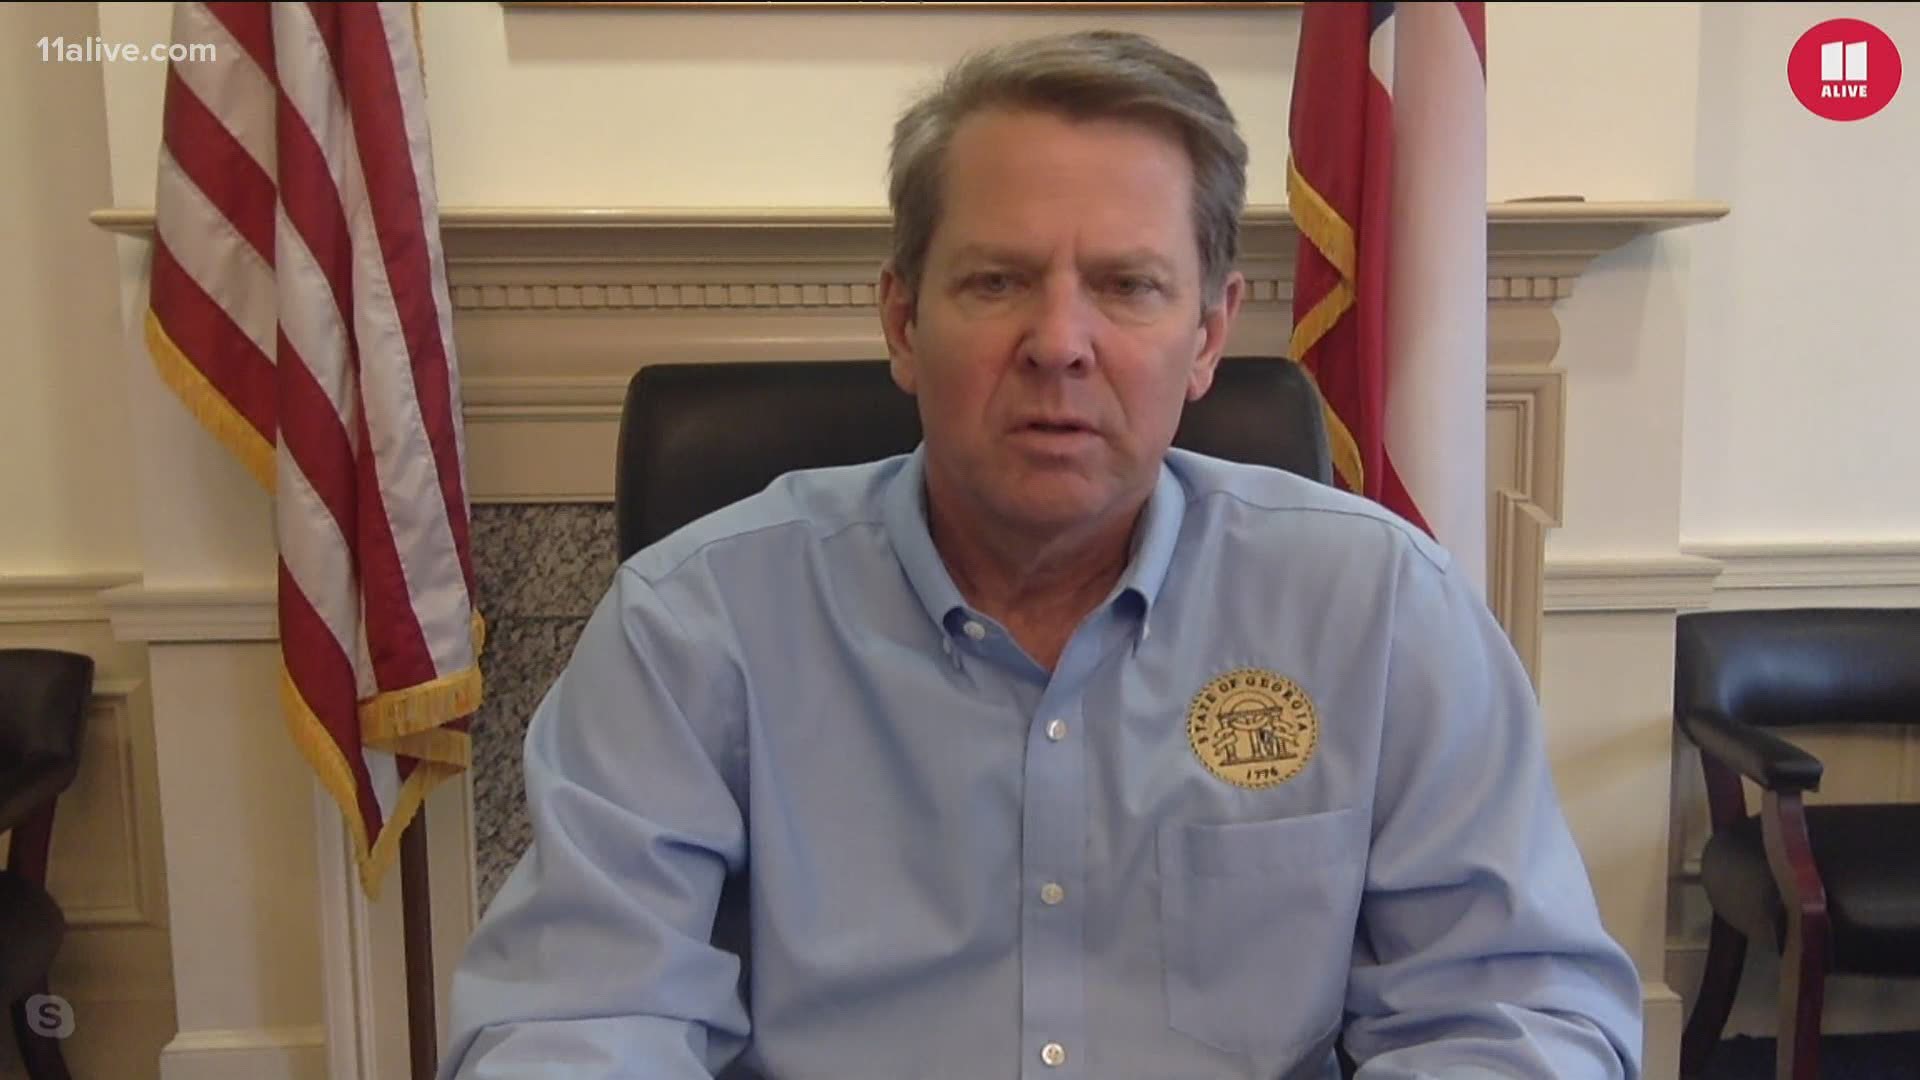 Georgia Gov. Brian Kemp said he will continue to urge residents to stay home whenever possible.